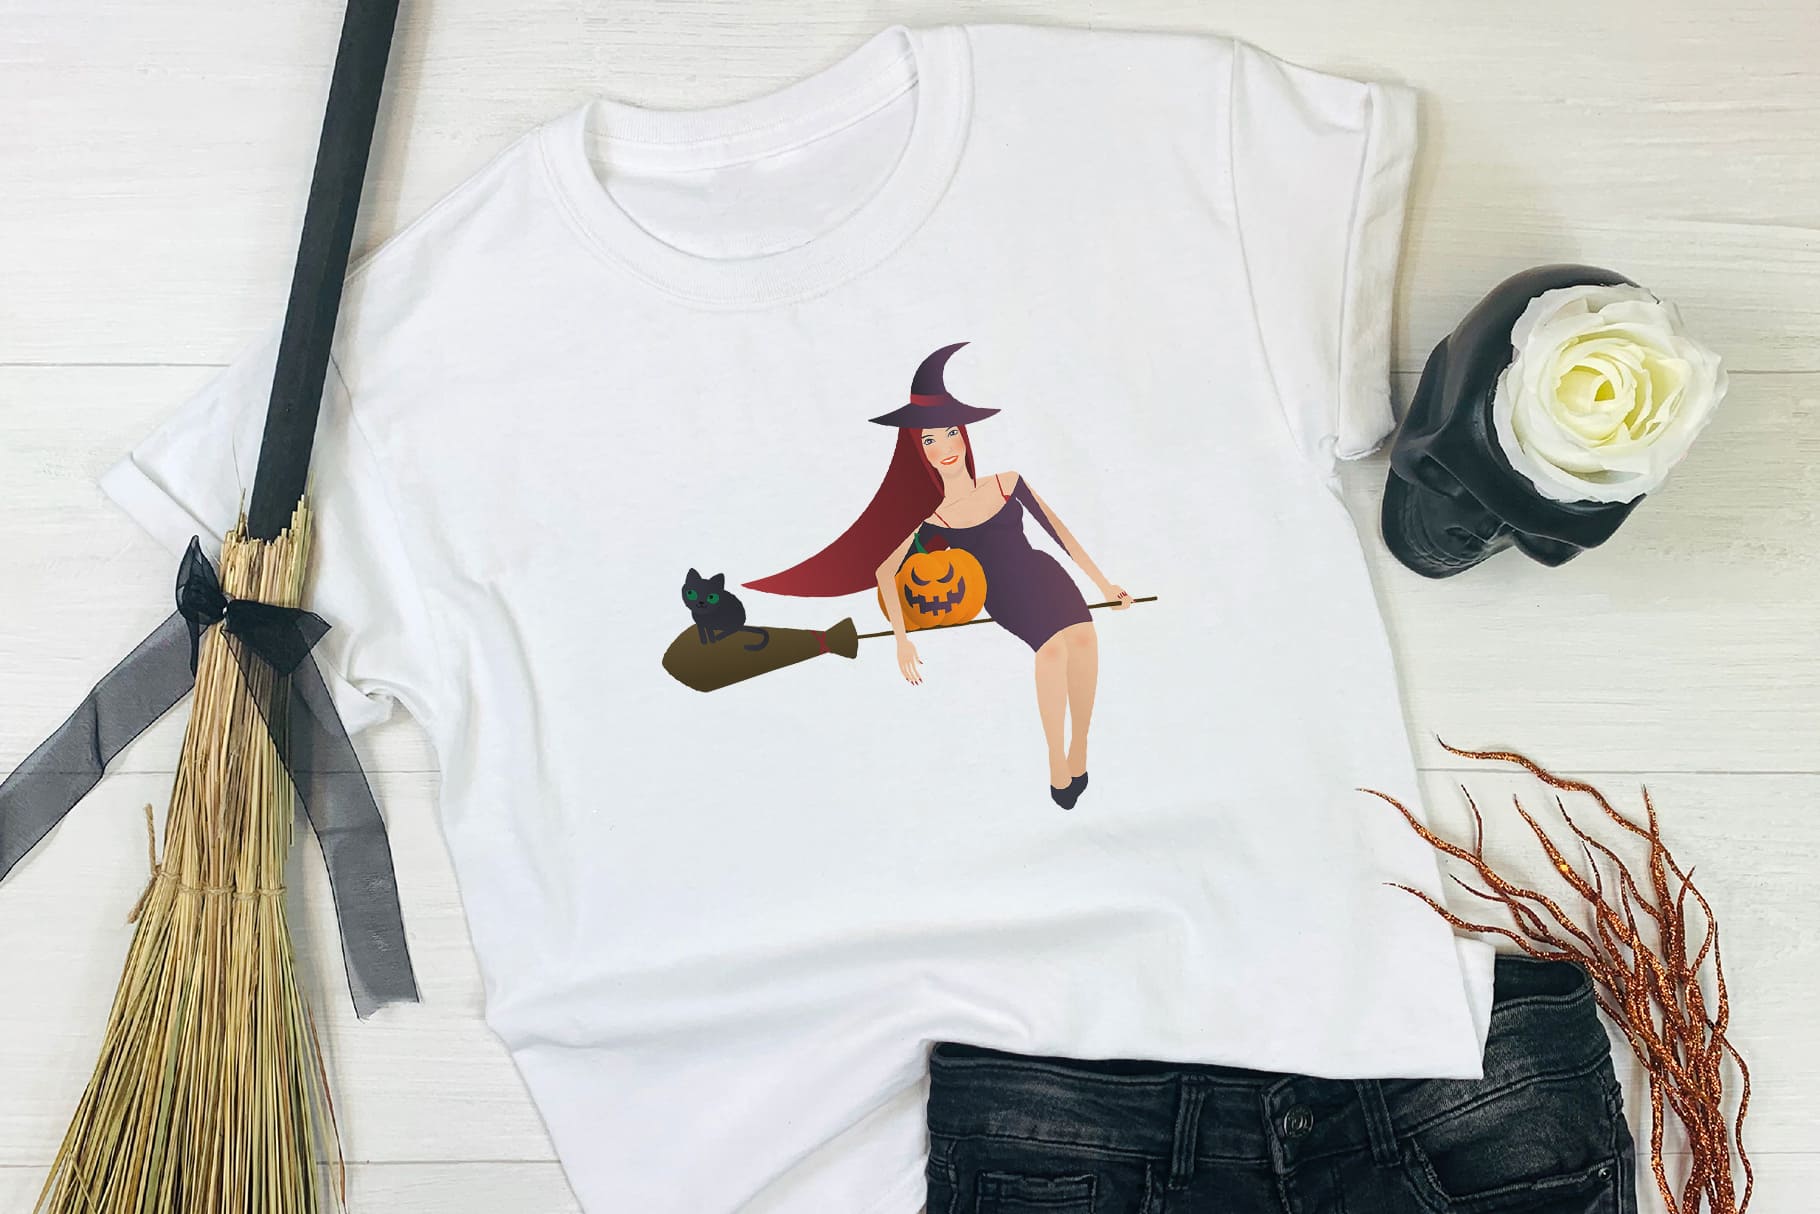 This graphic looks great on clothing. Decorating a T-shirt with a witch on Halloween is a sacred thing.